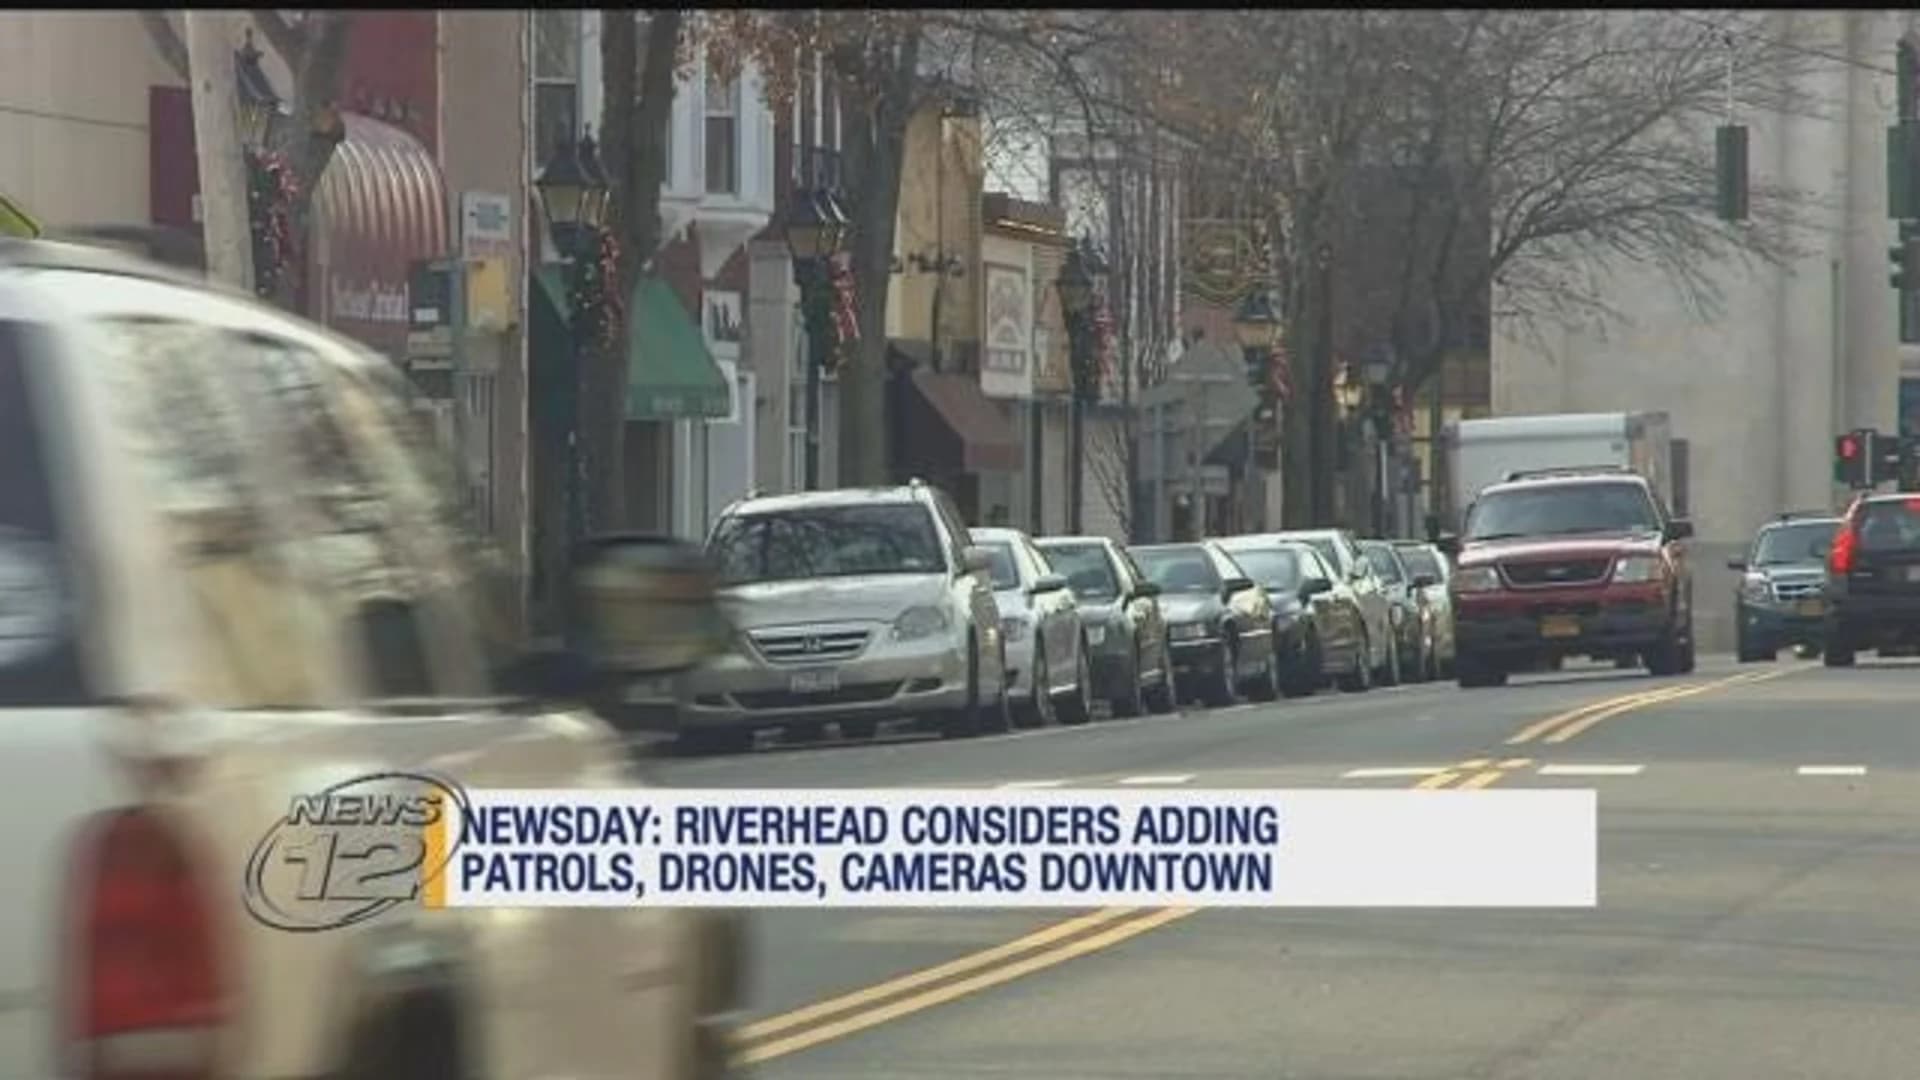 Riverhead officials consider adding patrols, drones to downtown